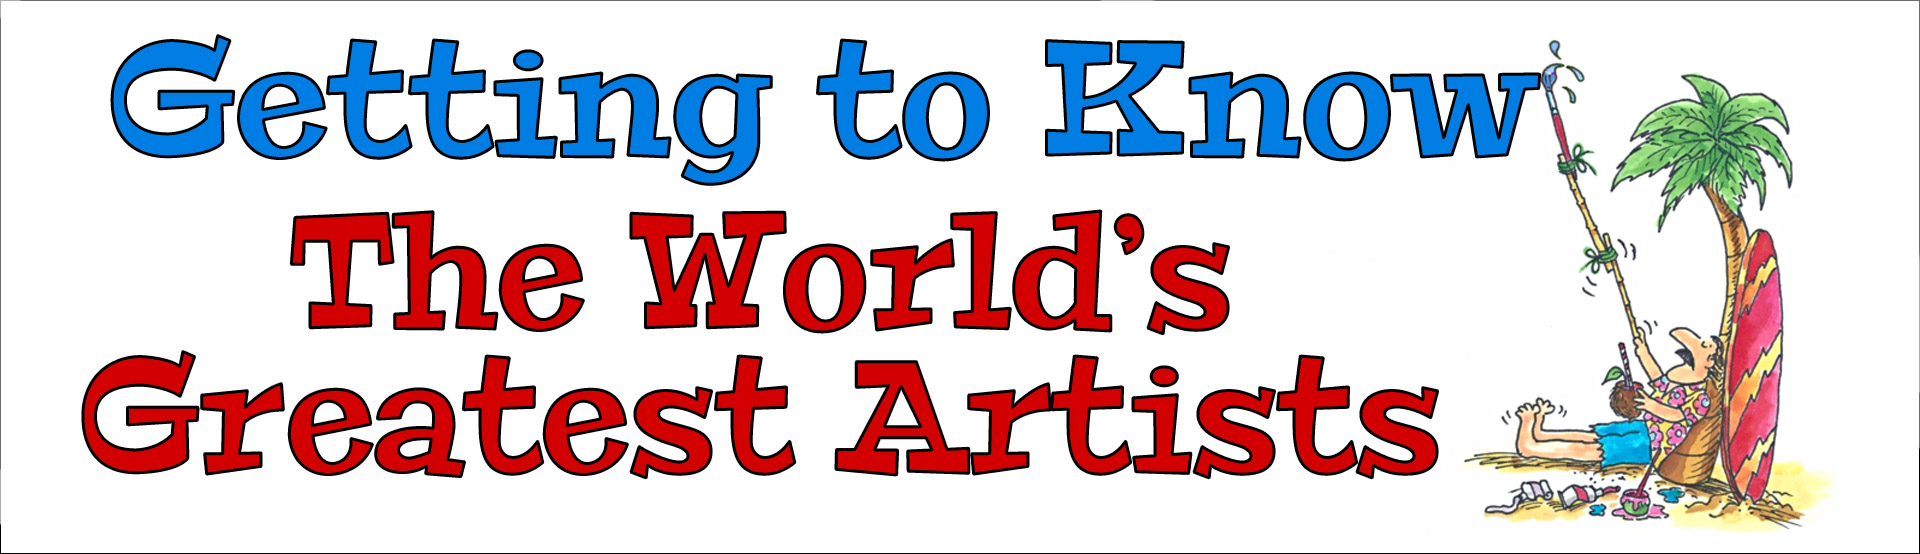 Getting To Know Artists